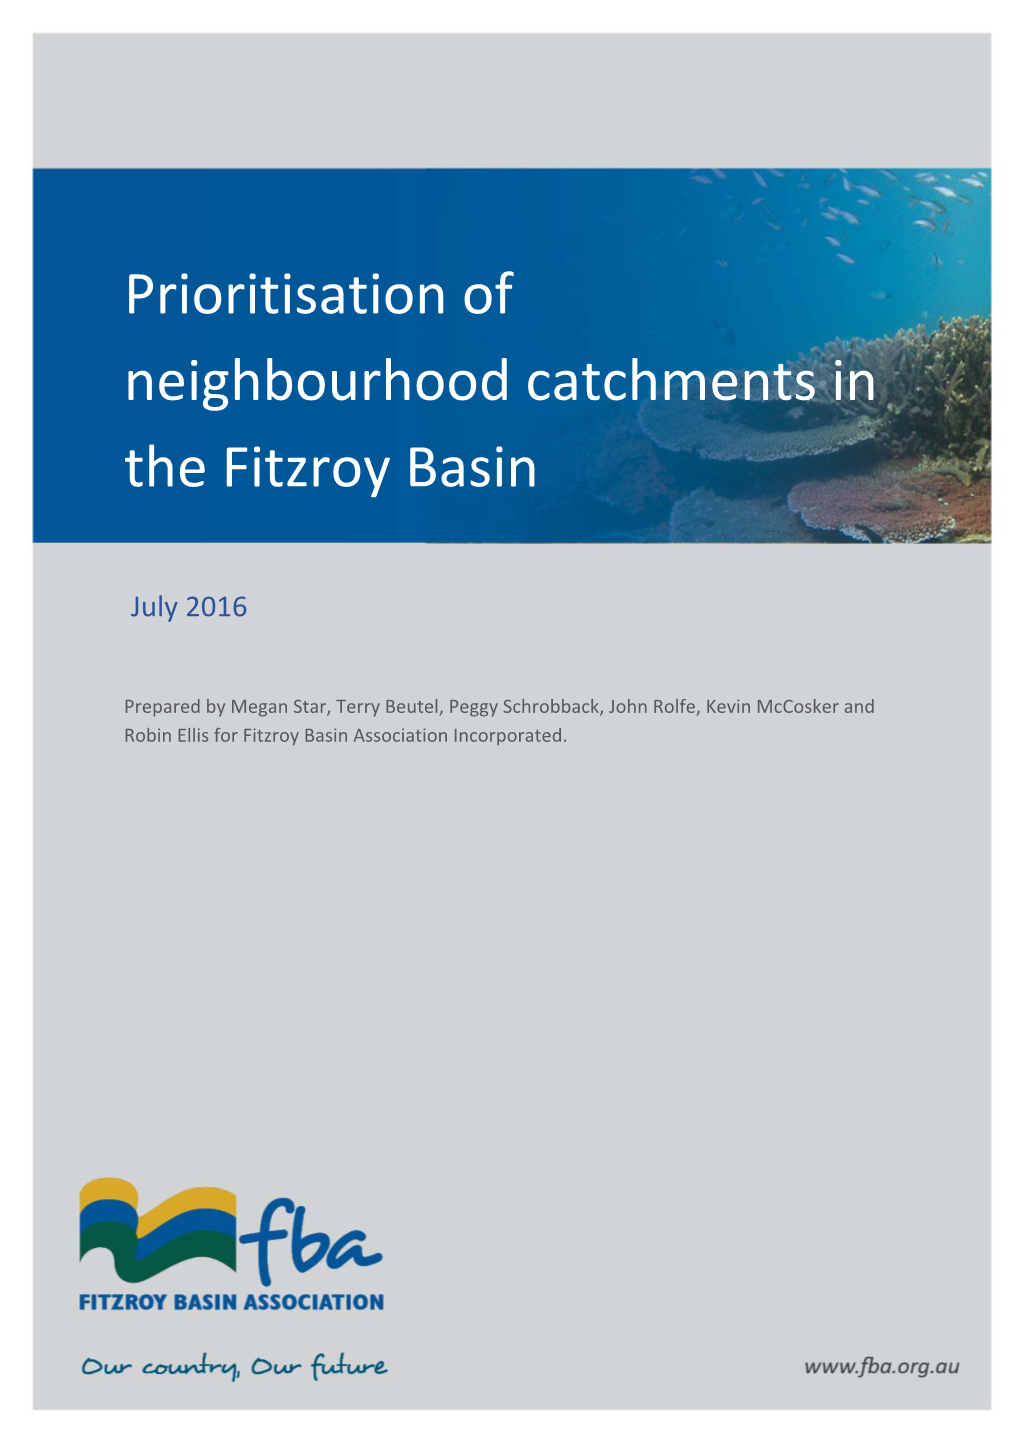 Prioritisation of Neighbourhood Catchments in the Fitzroy Basin